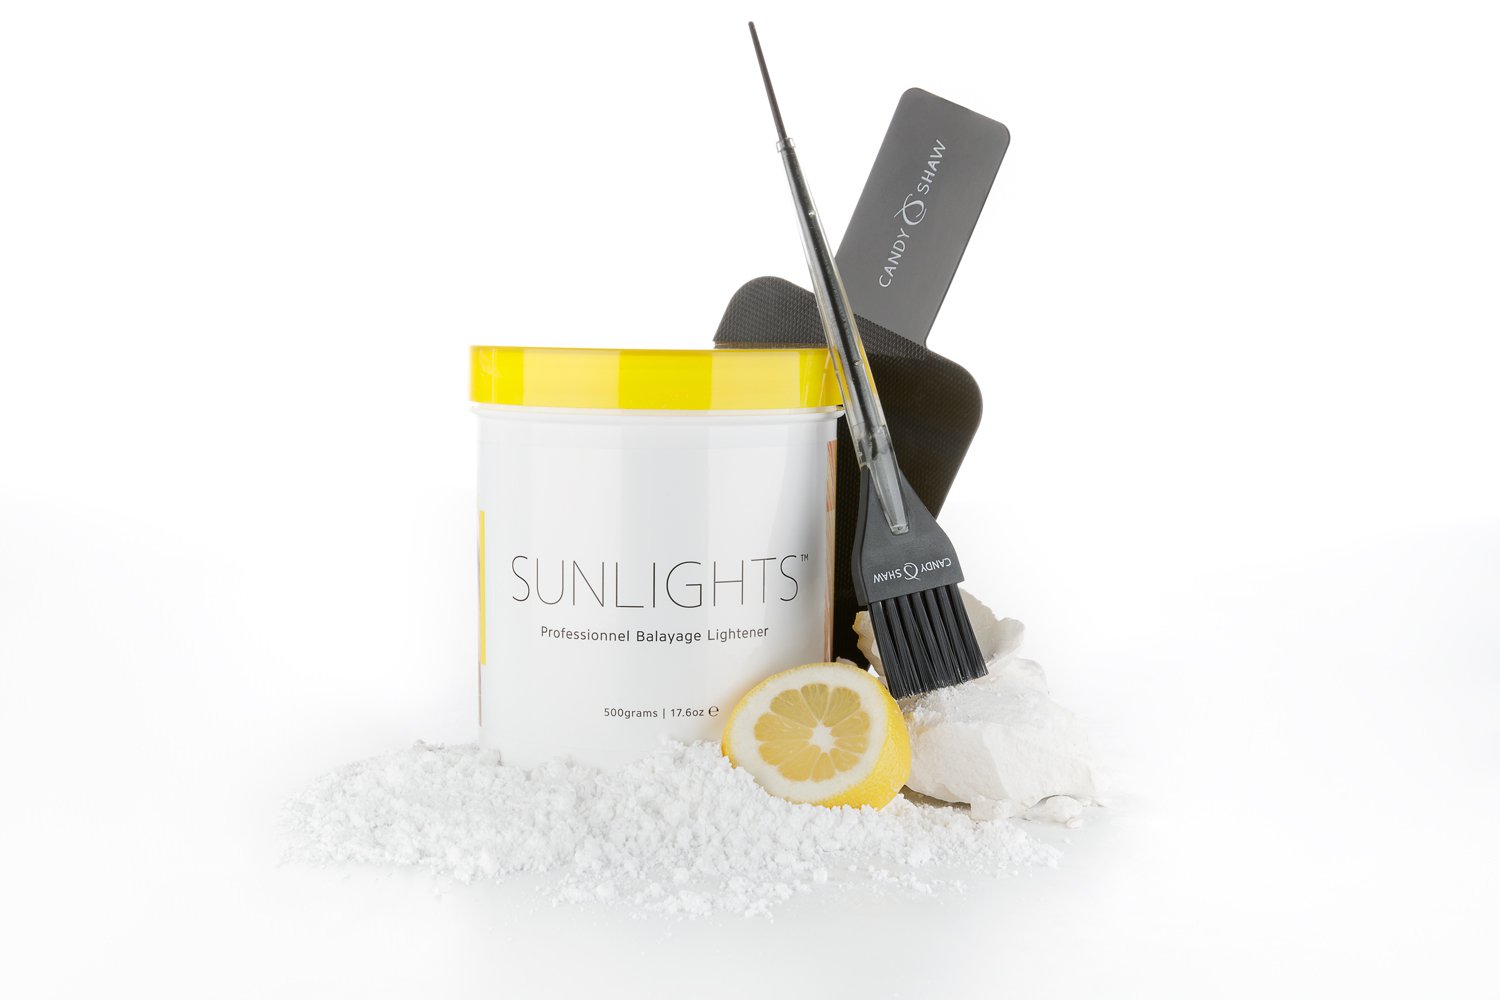 Sunlights Balayage Launches in Australia New Zealand